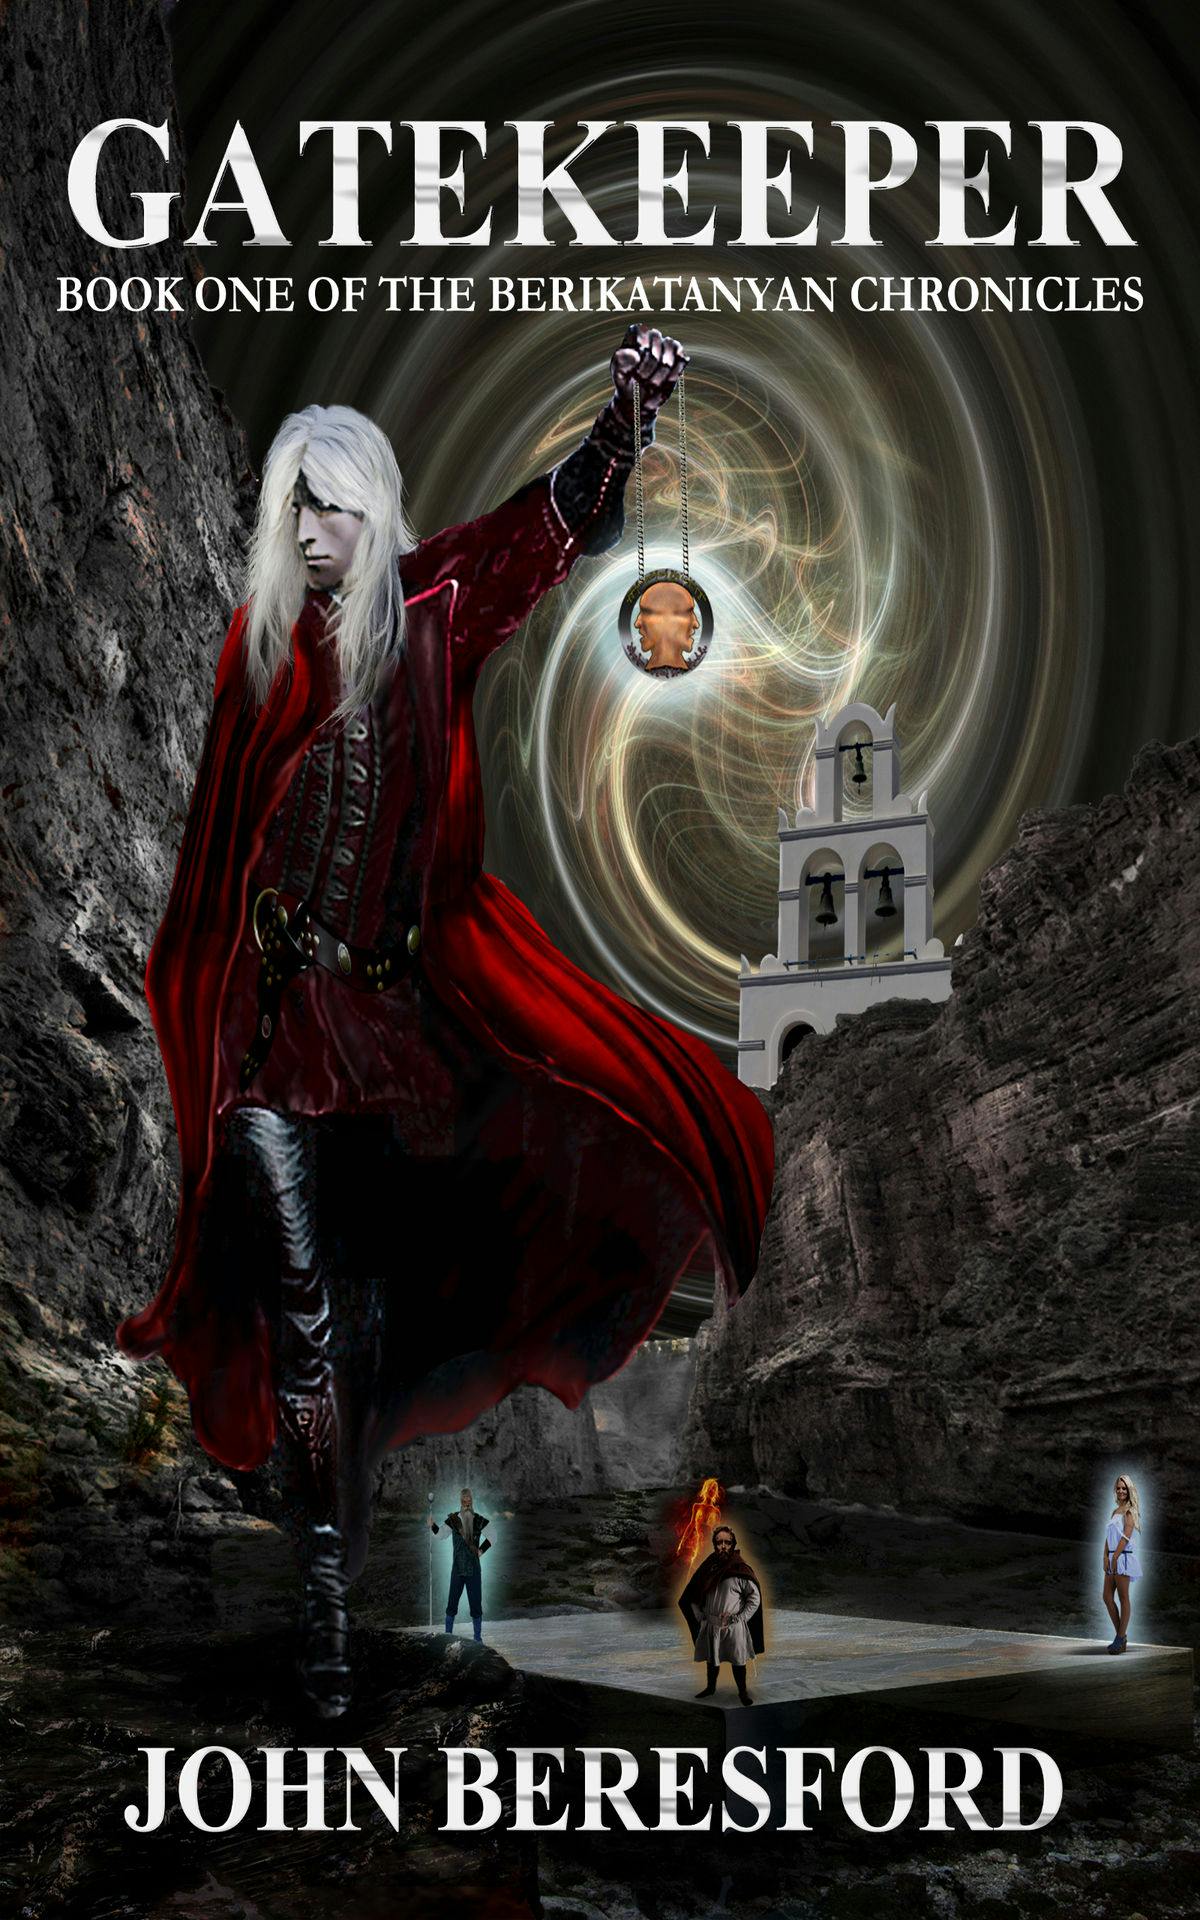 A white haired man wearing a long red coat holds a two-faced medalion in front of a swirling background  of white and gold threads.